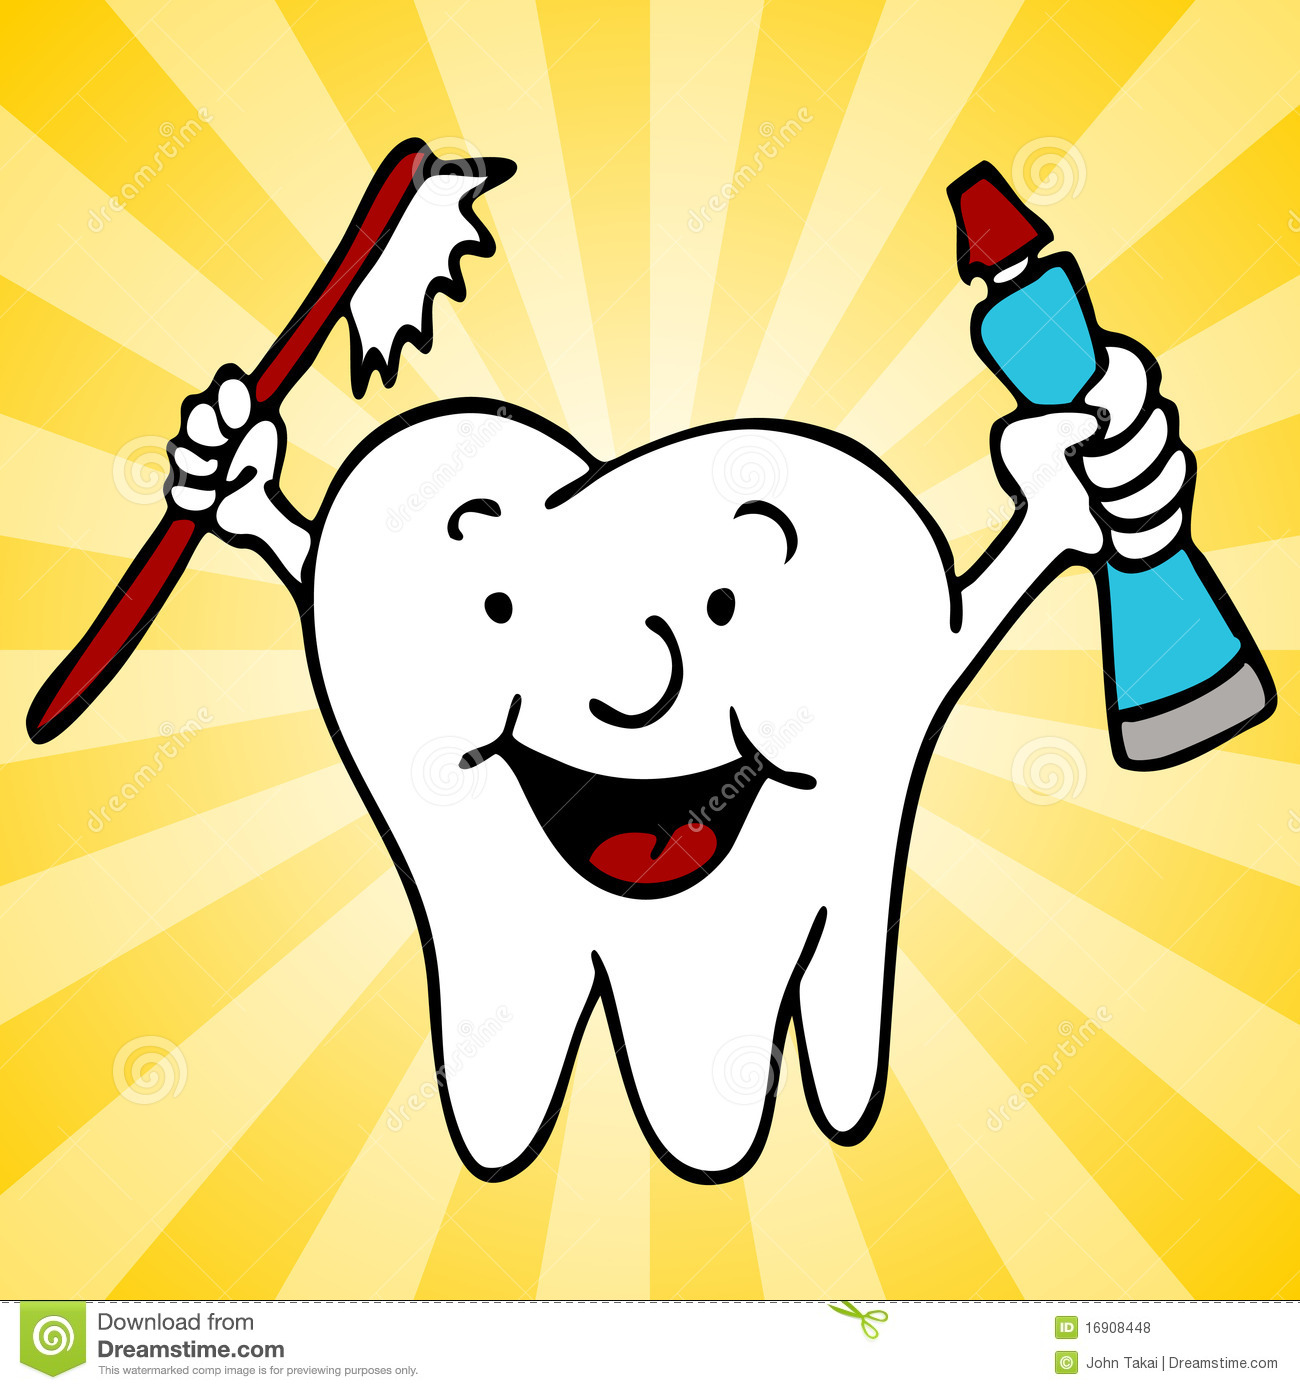 Healthy Clean Teeth Tooth Character Royalty Free Stock Photos   Image    